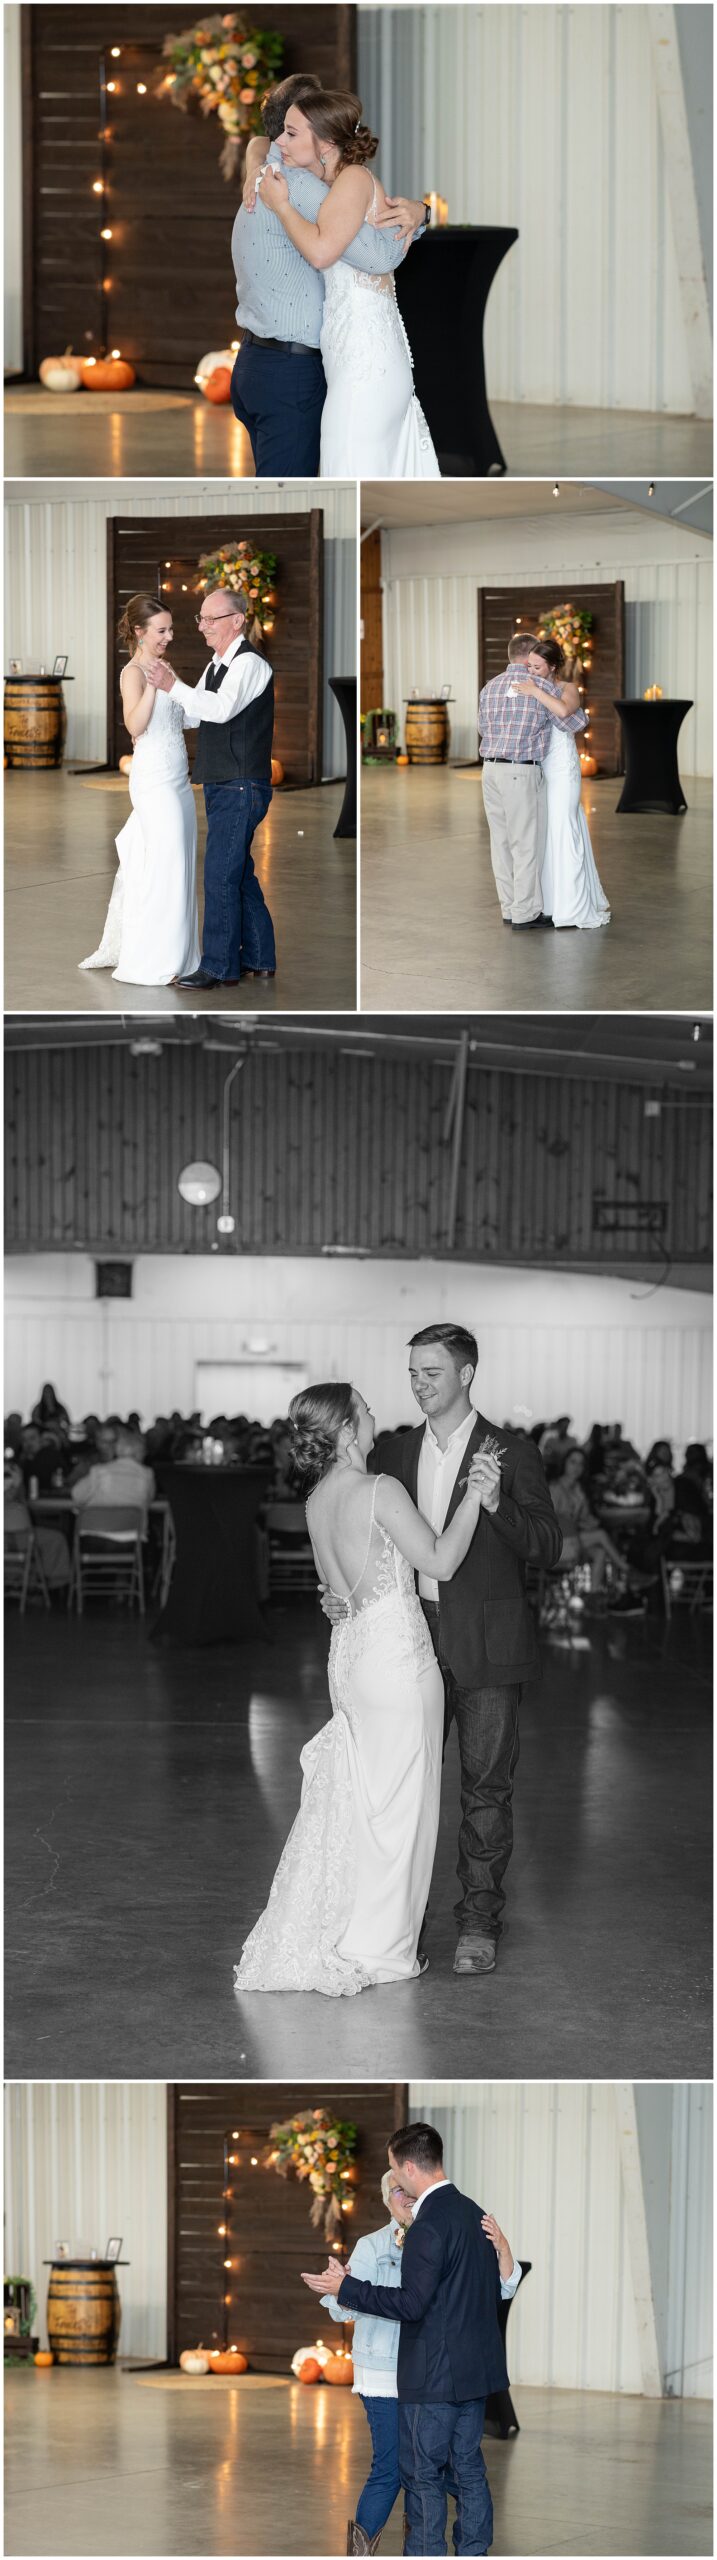 weddding reception at Rock county Fairgrounds in Janesville wI 